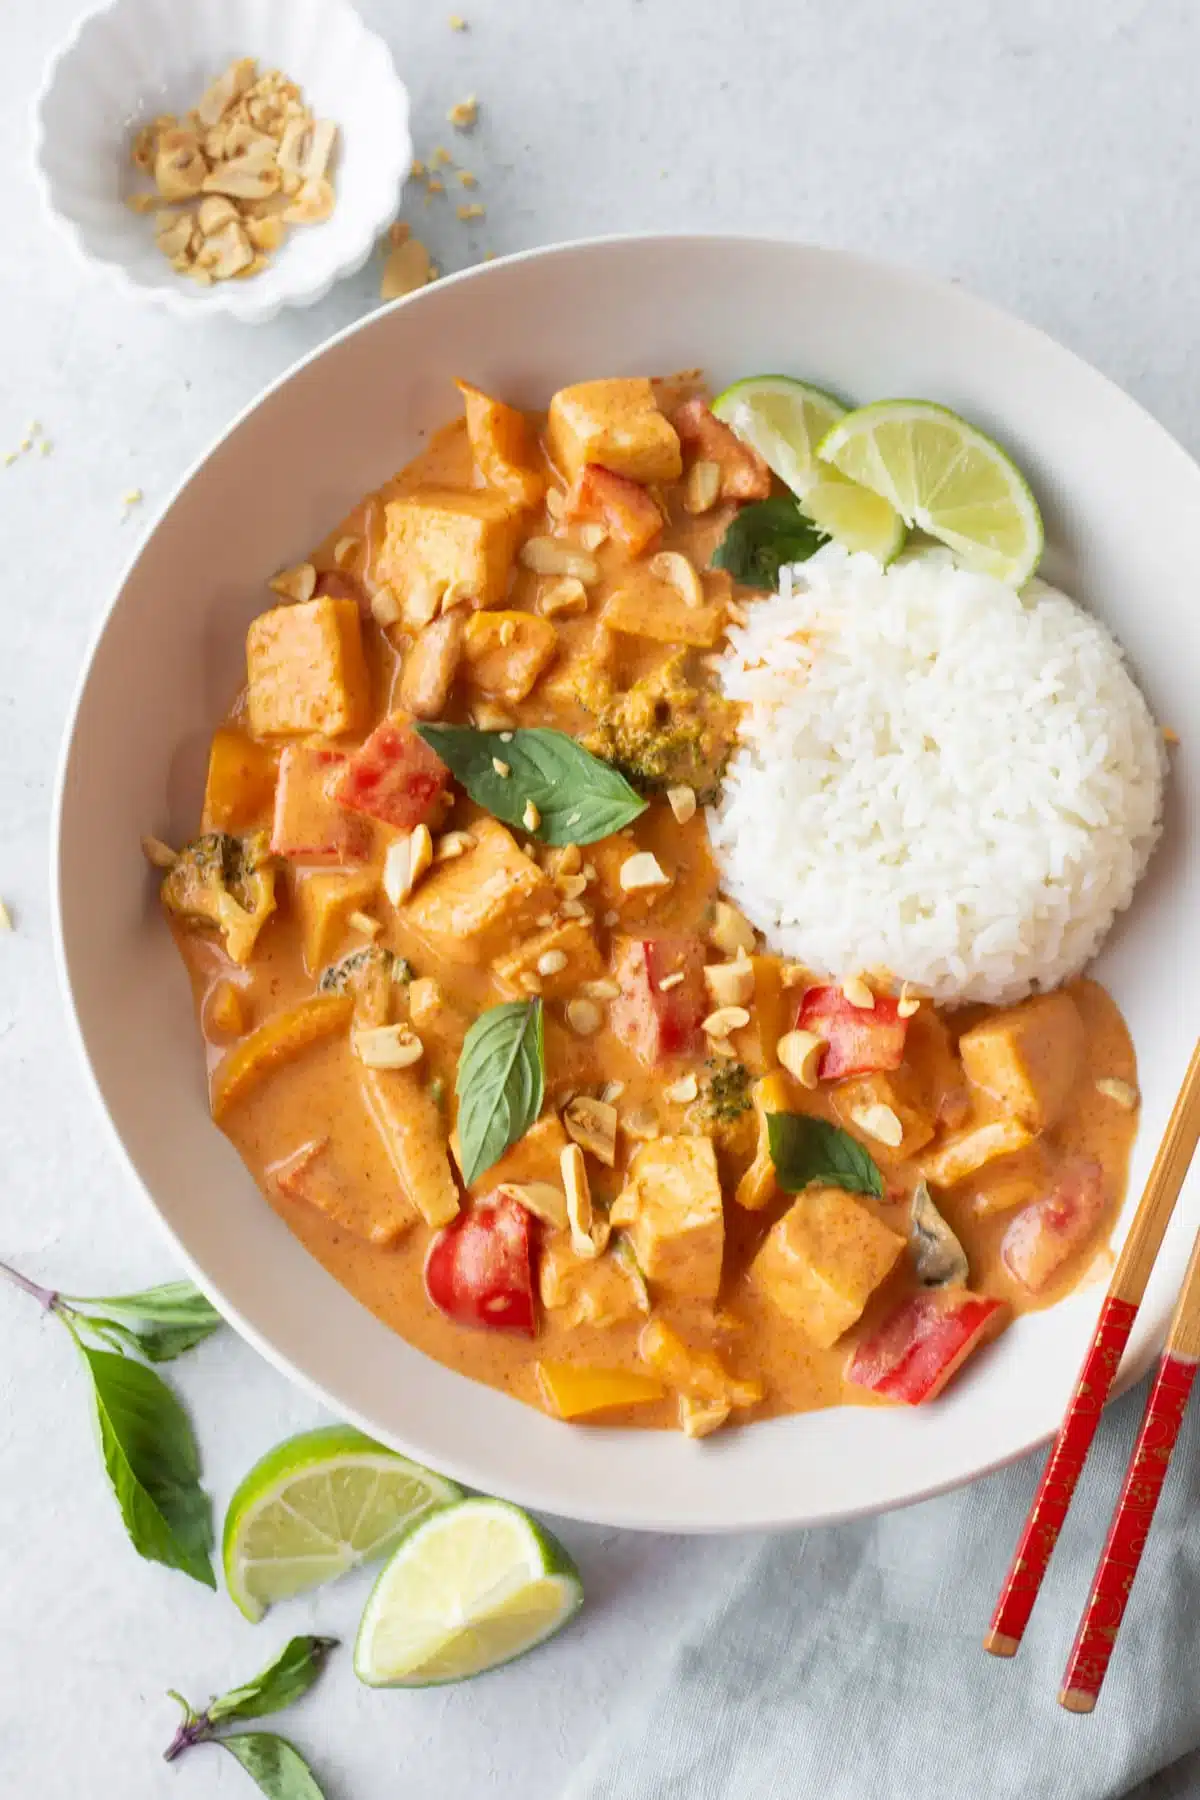 Vegan Thai tofu curry served with rice and chopsticks in a white bowl.